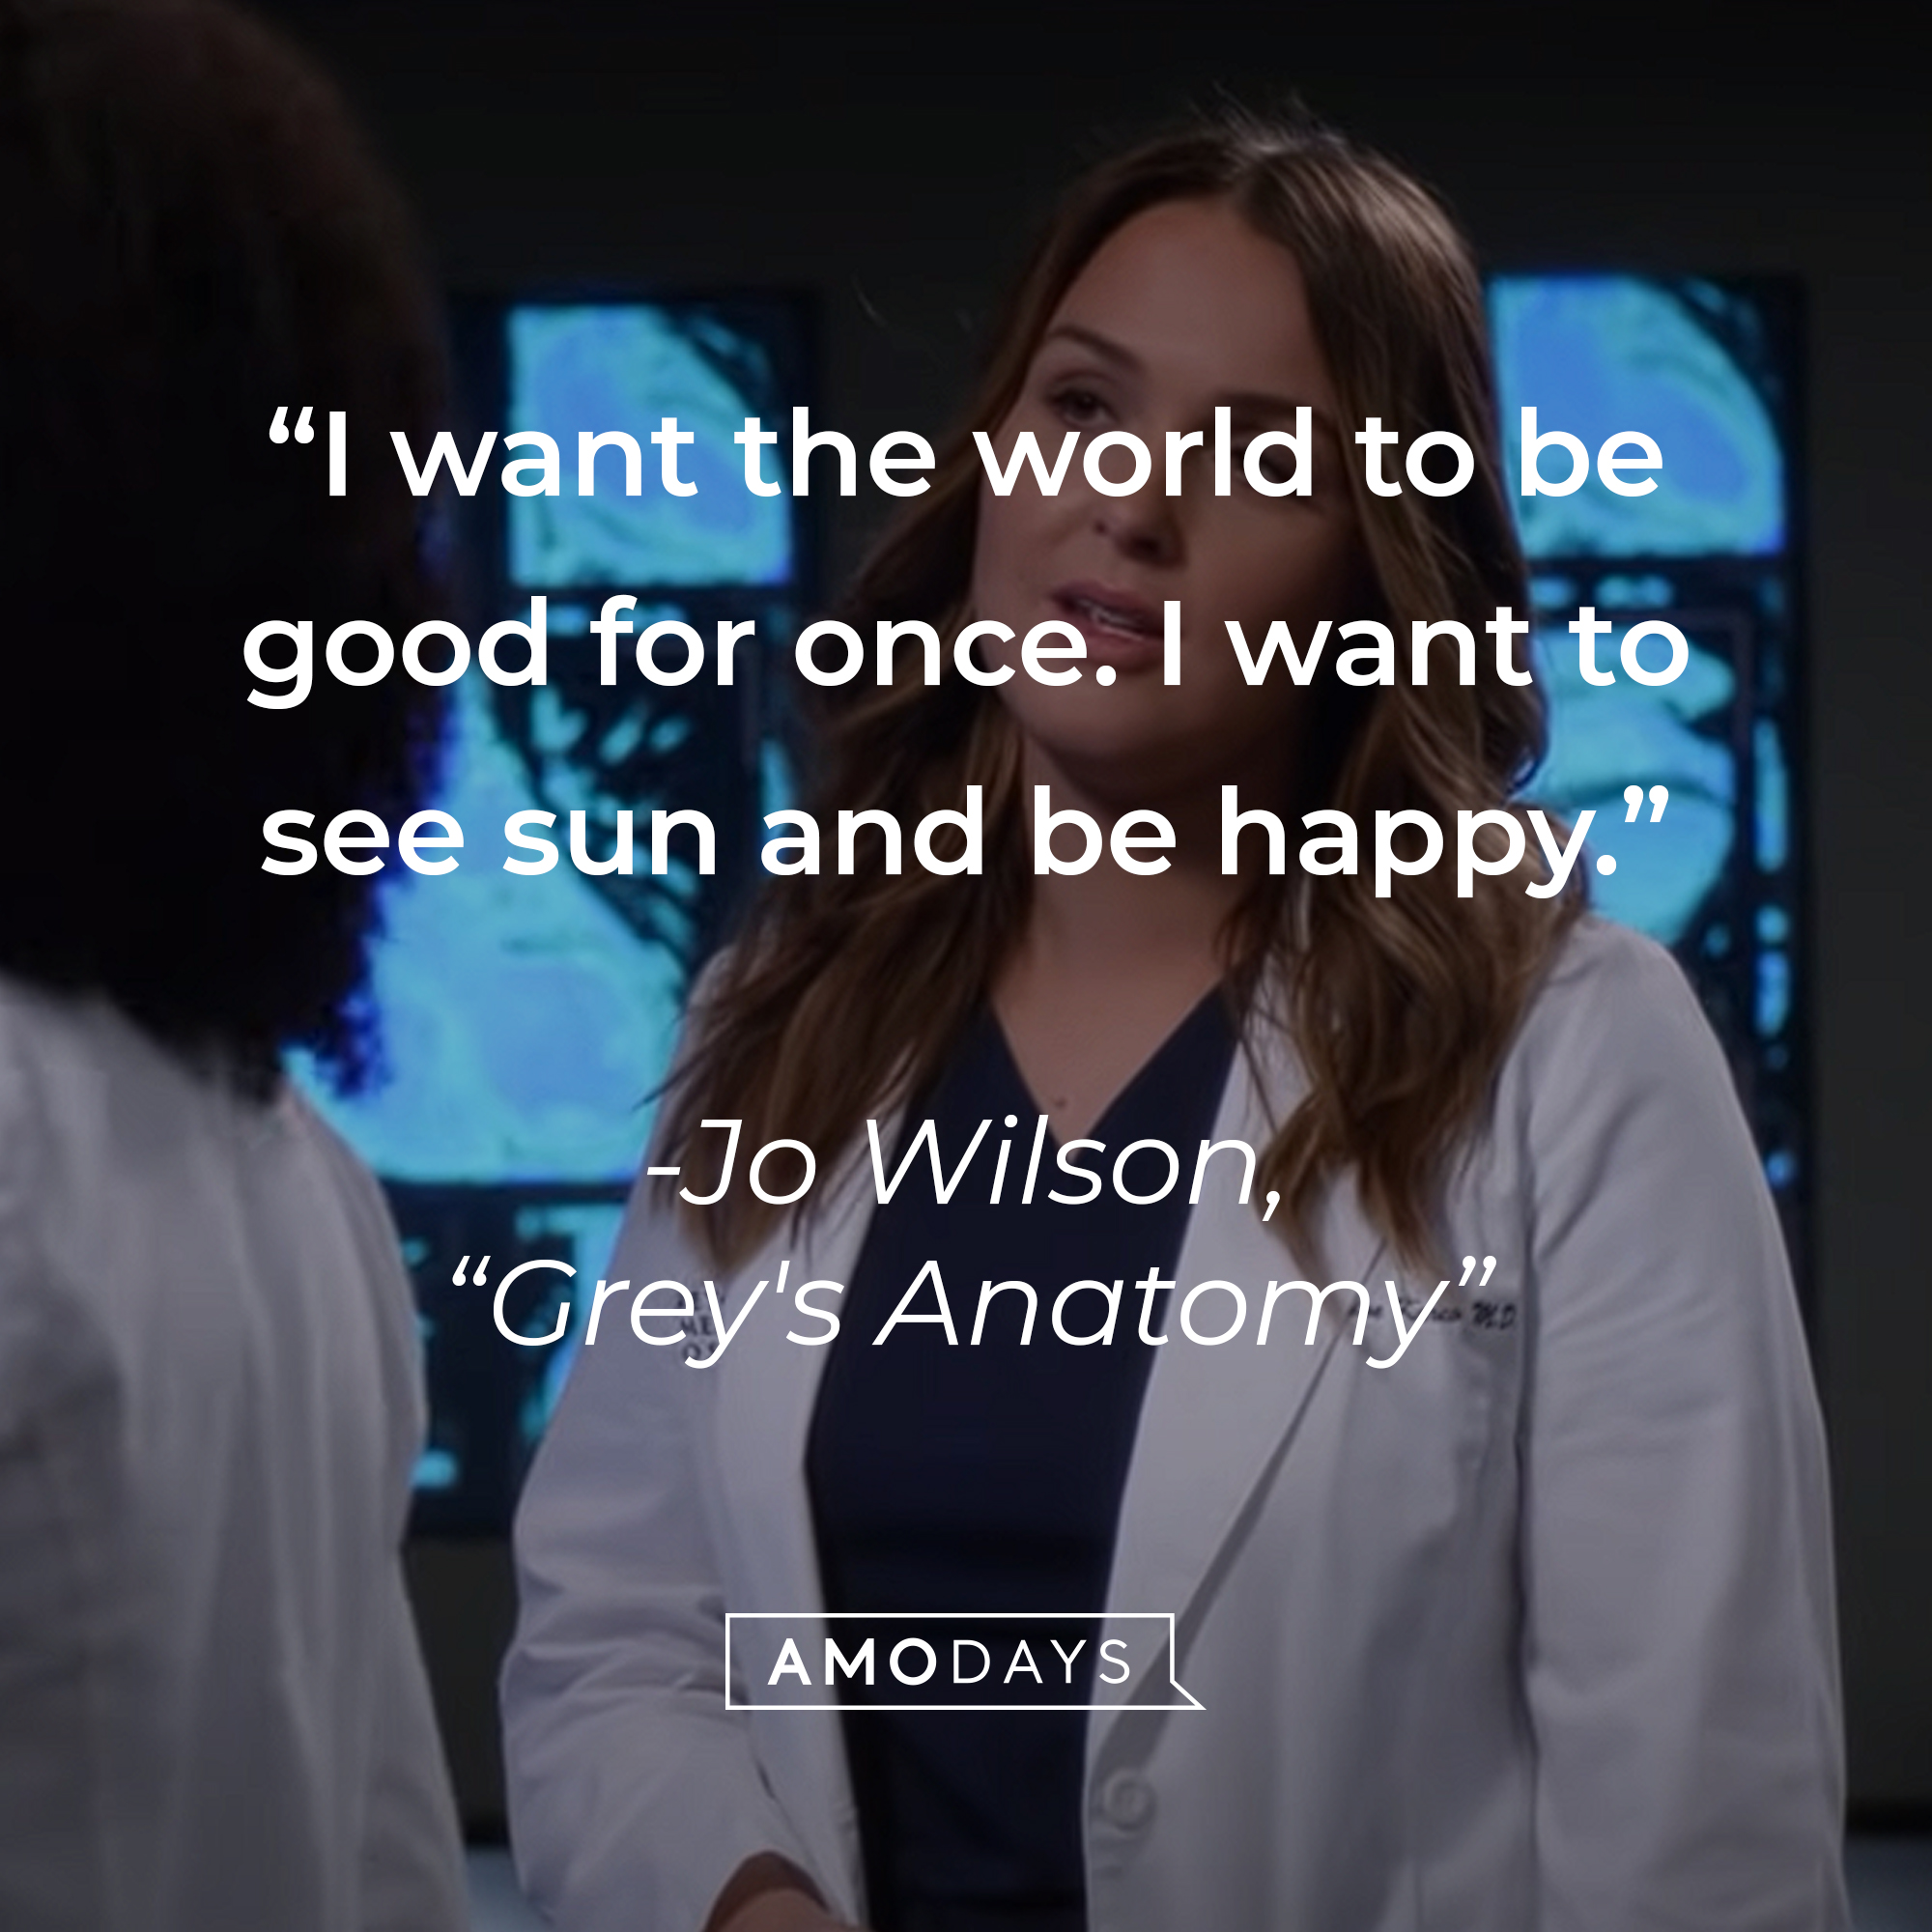 Jo Wilson’s quote from “Grey’s Anatomy”: “I want the world to be good for once. I want to see sun and be happy.” | Source: youtube.com/ABCNetwork